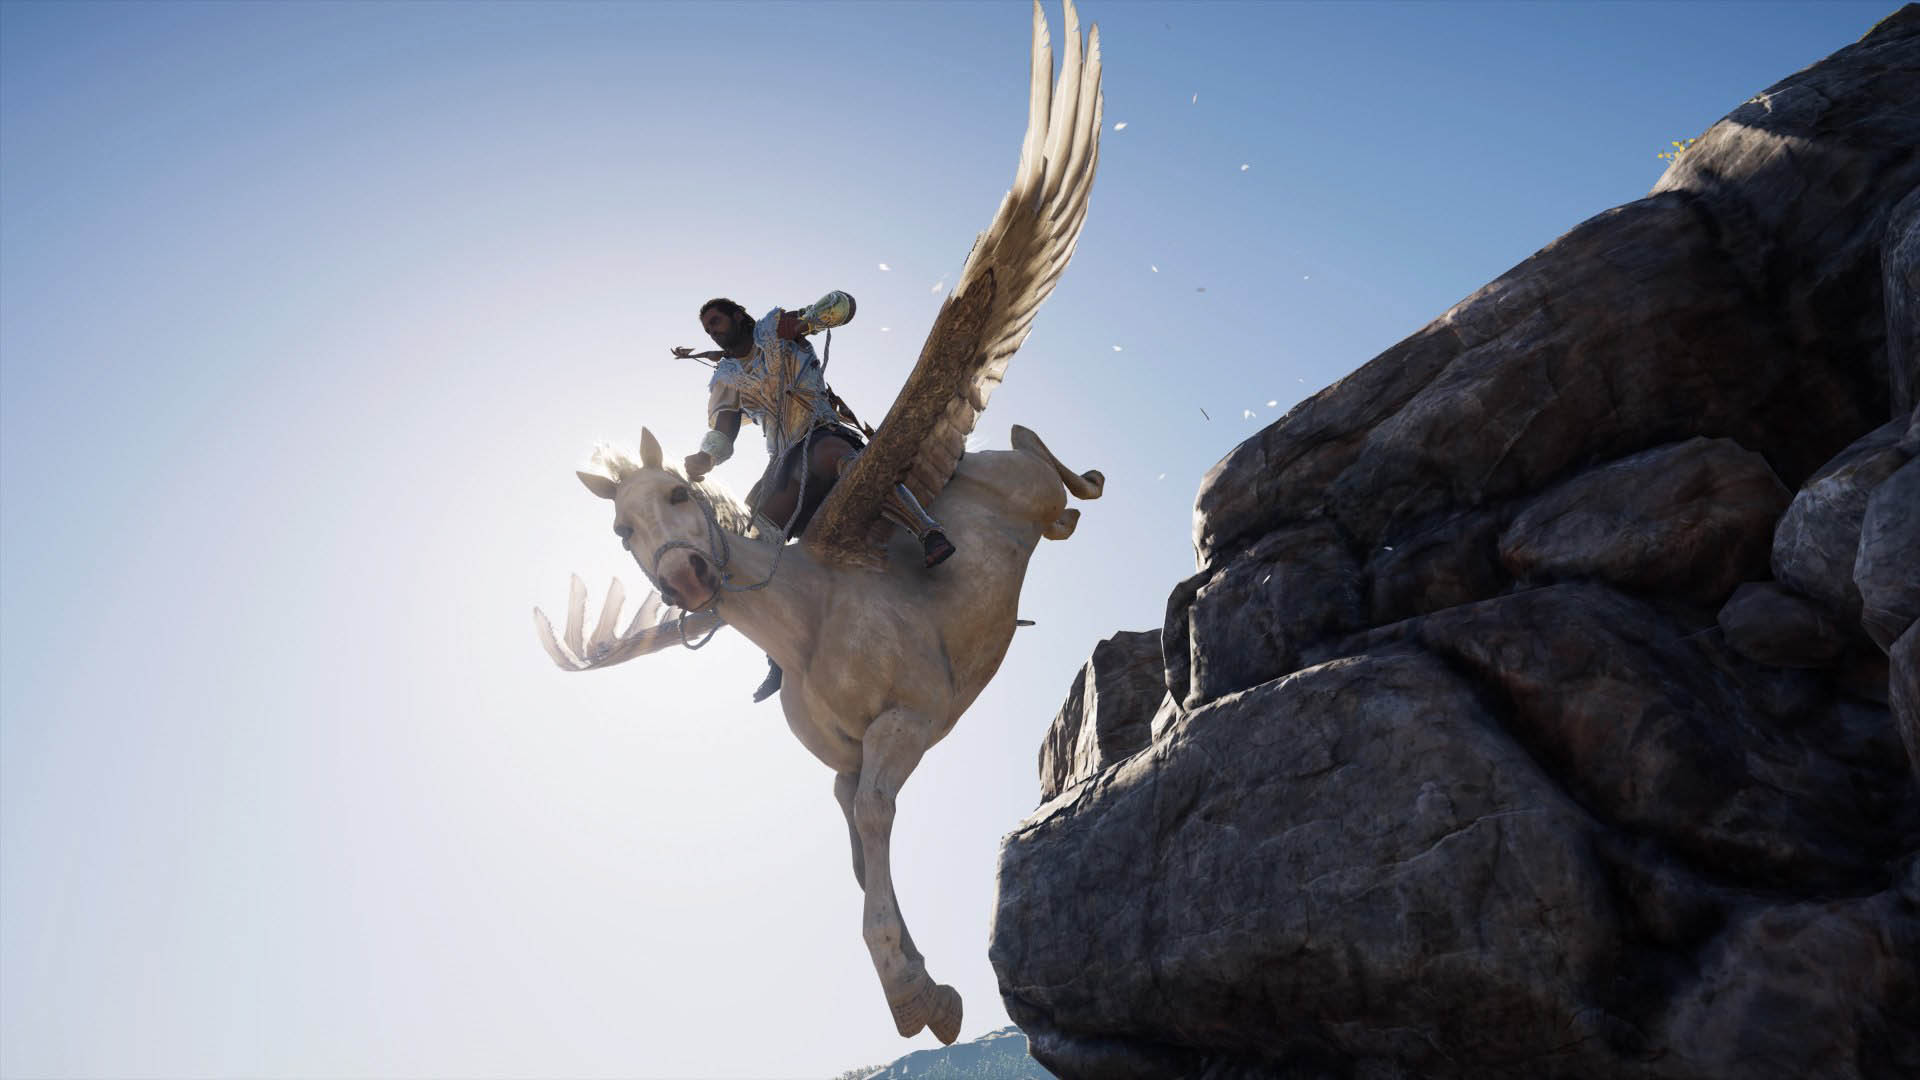 Assassin’s Creed Odyssey: in arrivo il New Game Plus